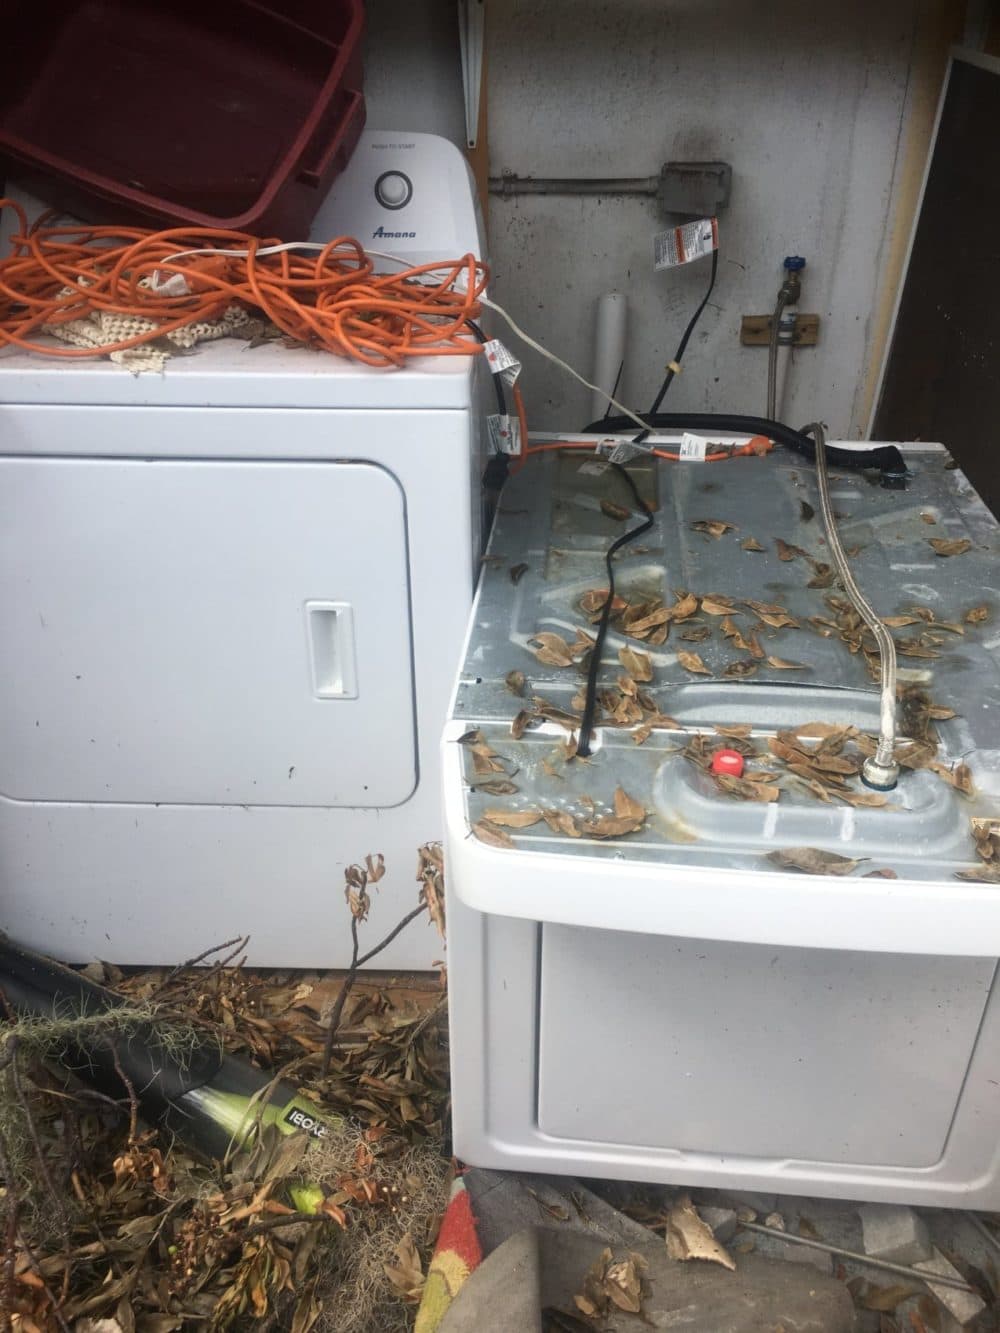 Her new washer and dryer were destroyed after Irma. (Courtesy of Rittel) 